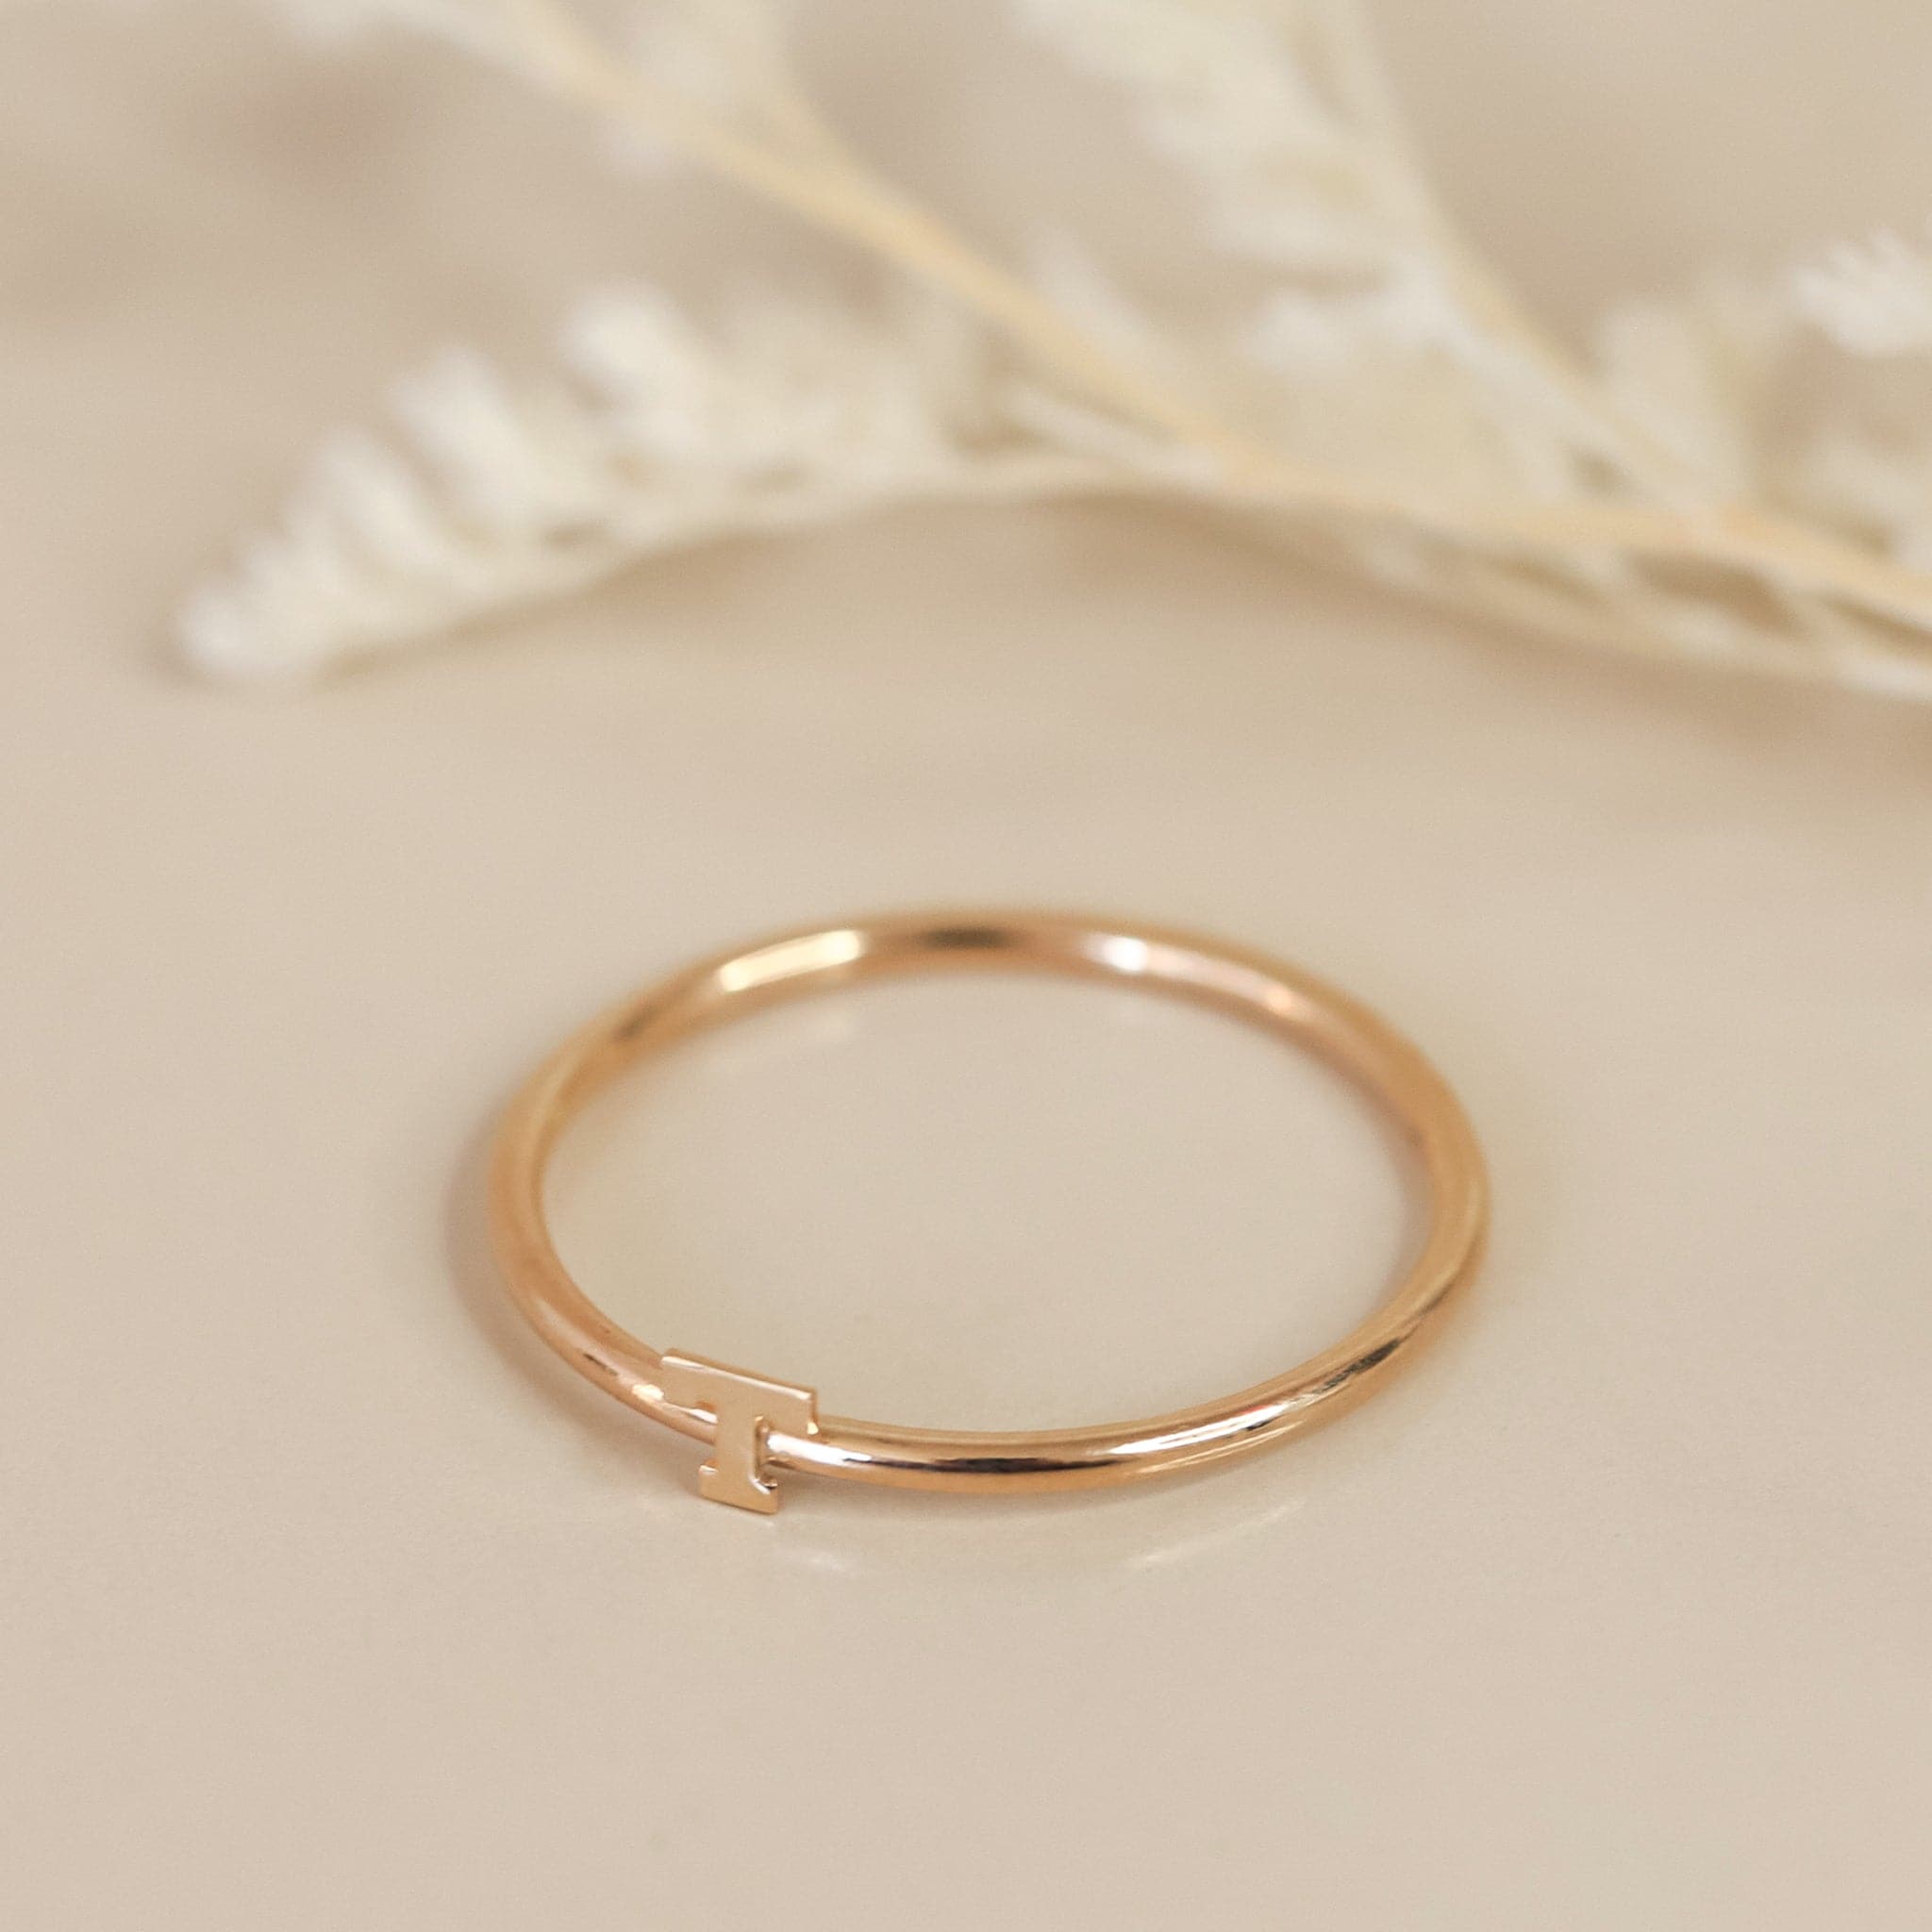 On a cream background is a dainty gold ring with an &quot;T&quot; in the center.